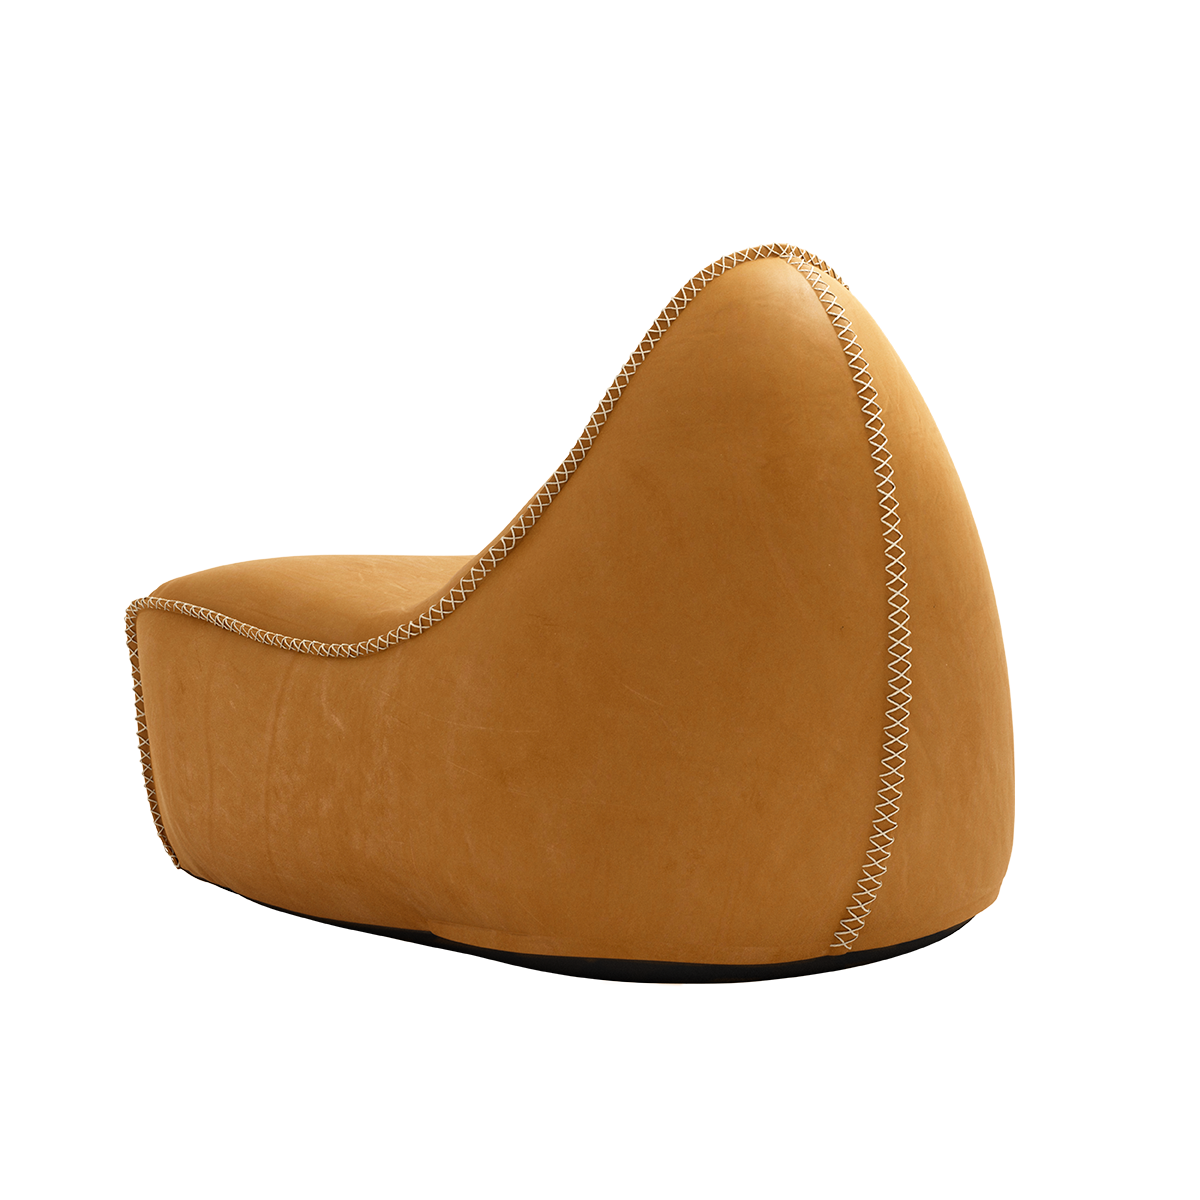 Luna Lounge Chair [Contract]